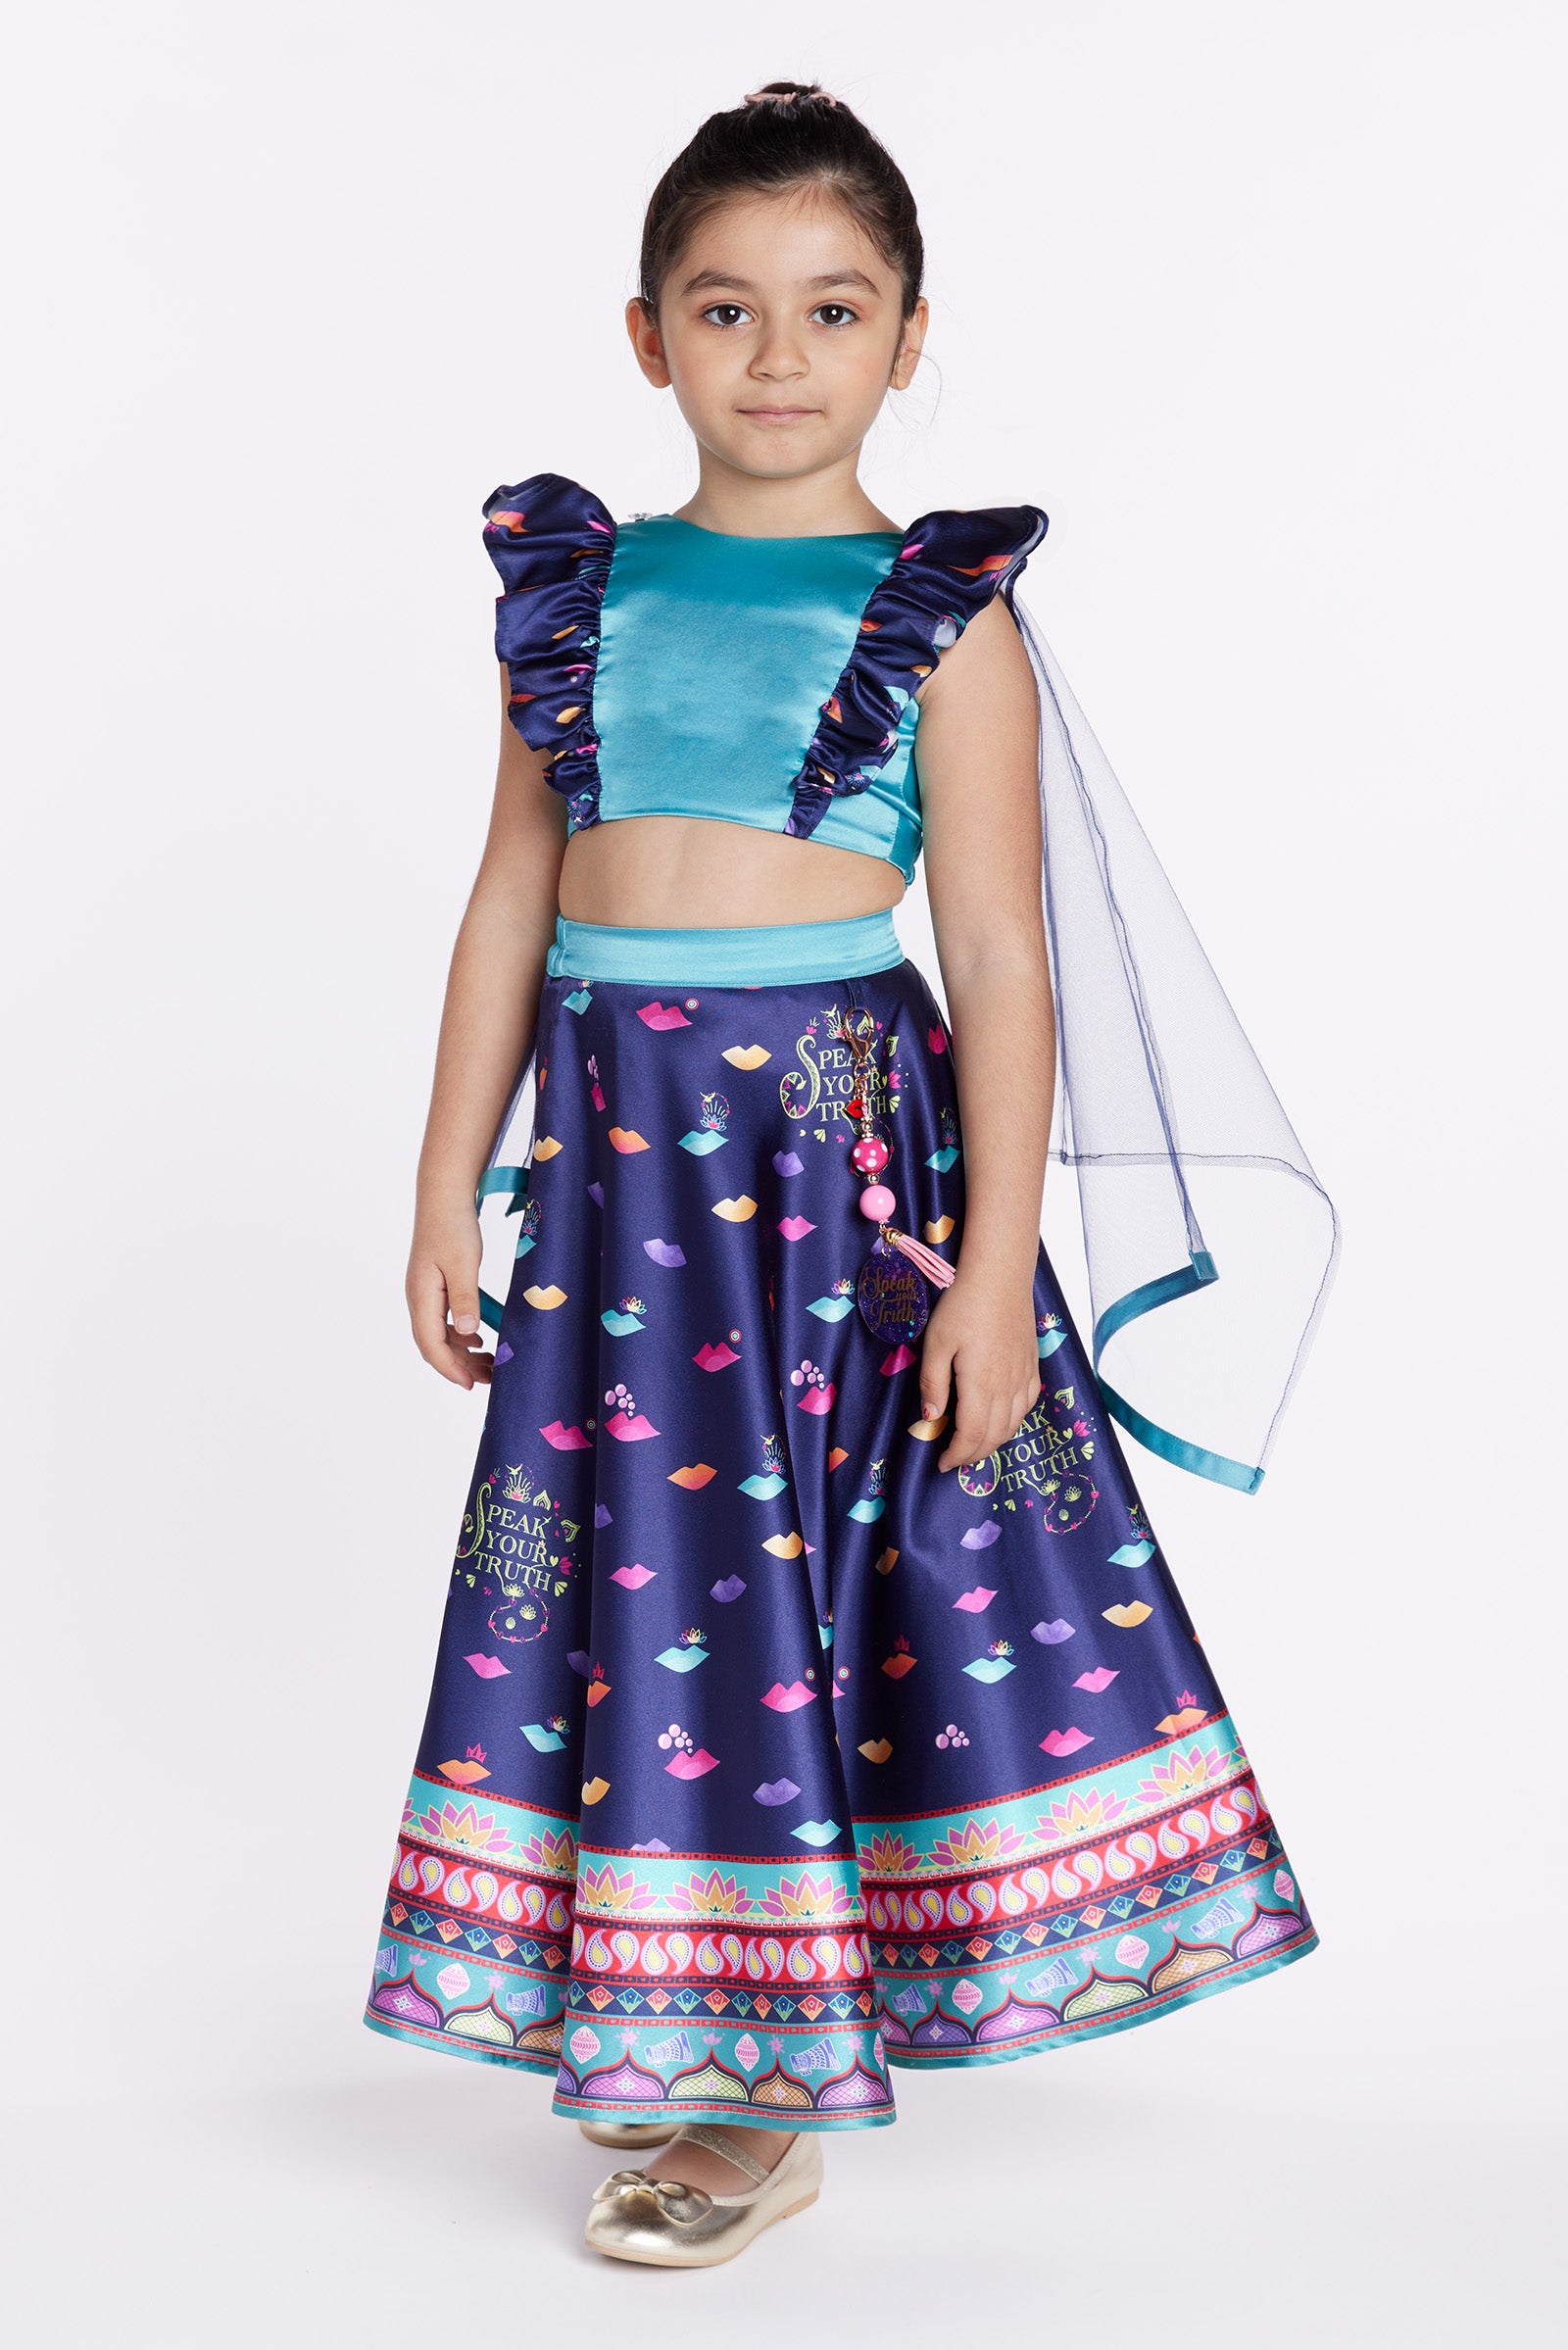 Girls Dresses, Indian Party Wear